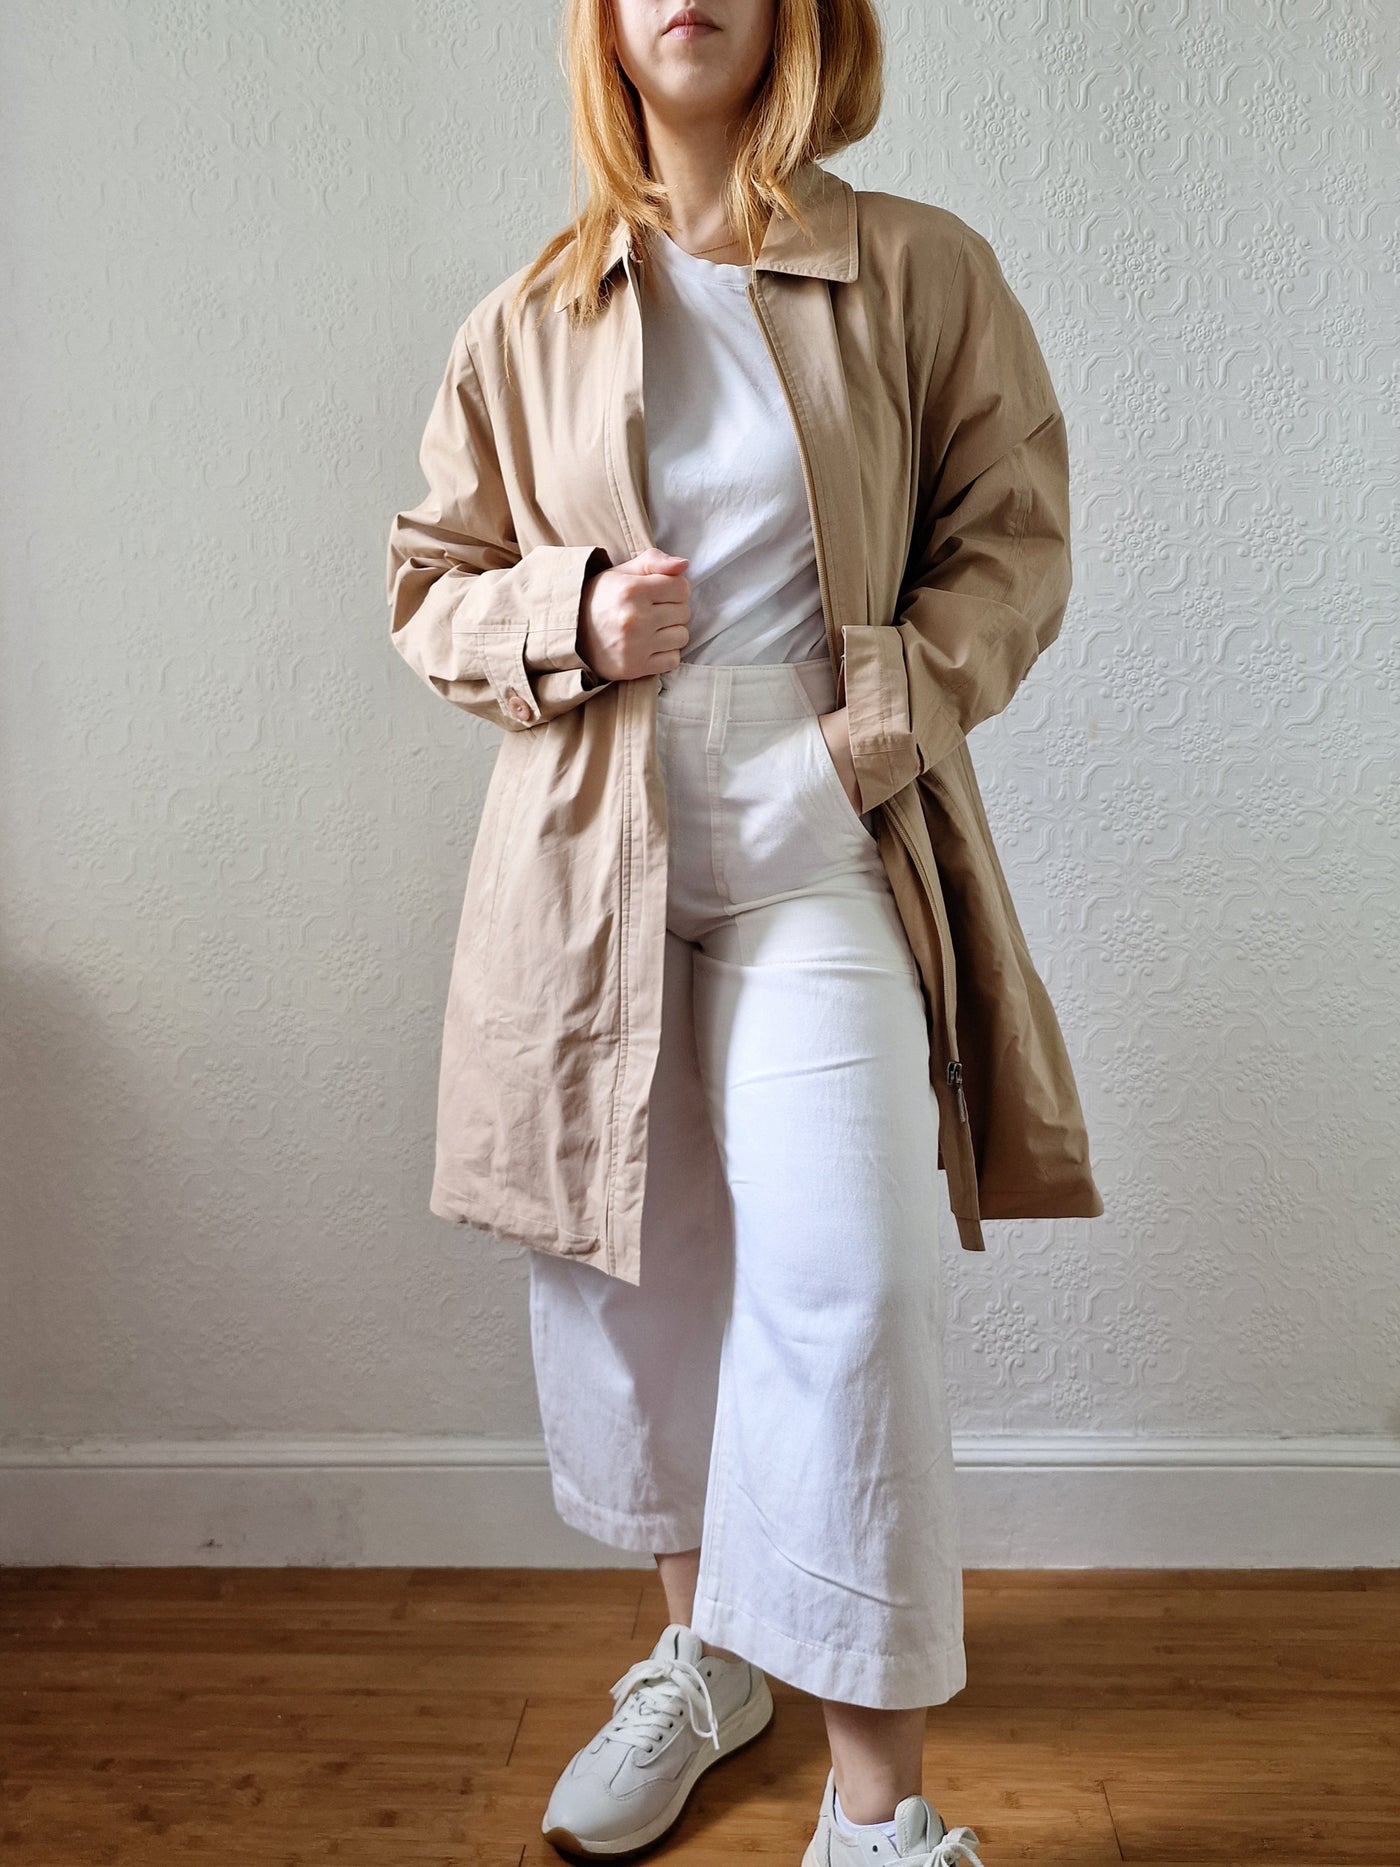 Vintage Beige Single Breasted Mid Length Trench Coat - M/L